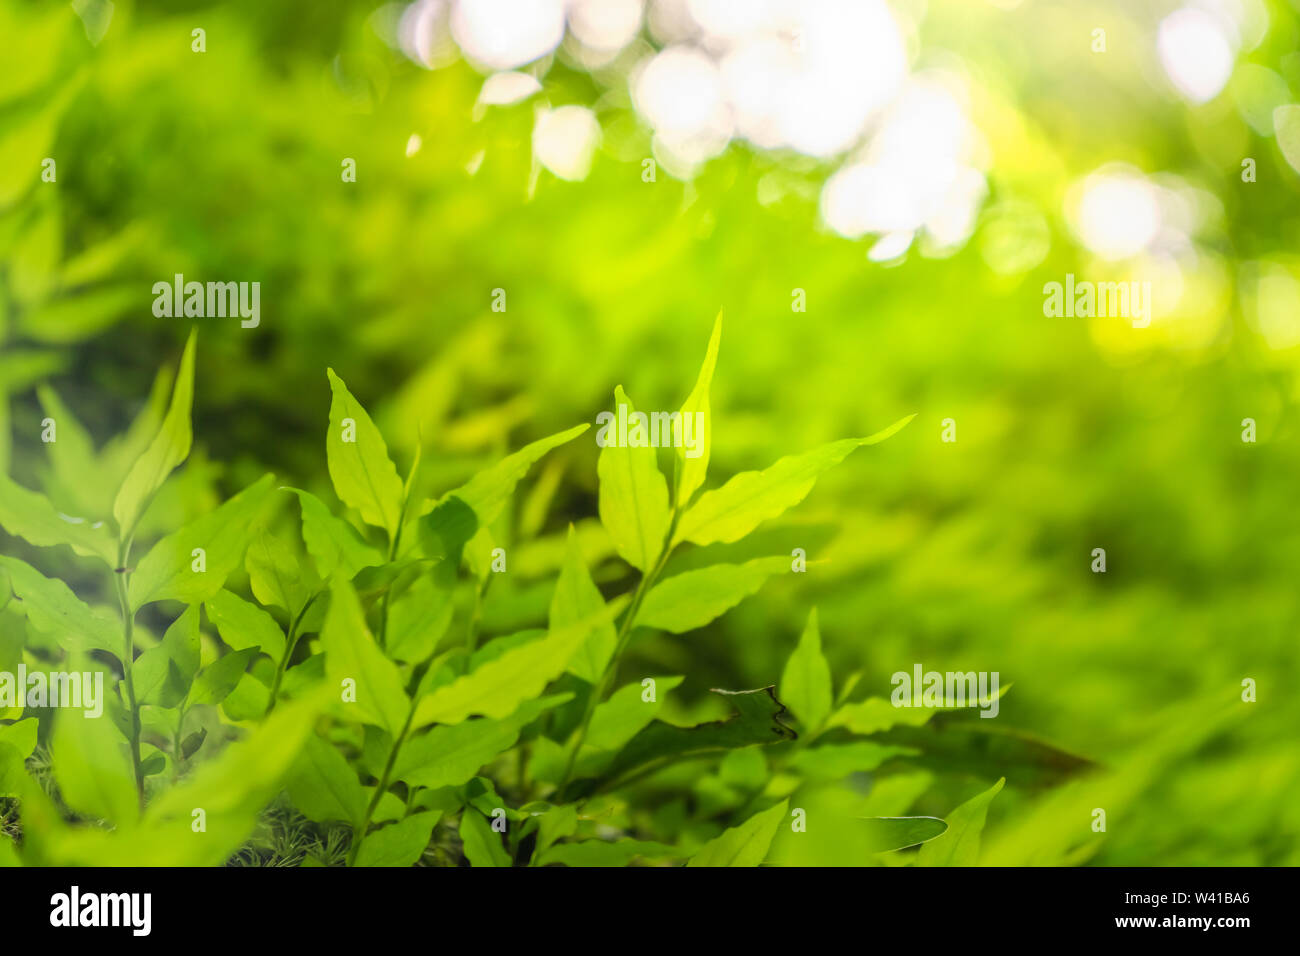 Green leaves pattern background, natural background and wallpaper. Nature  of green leaf in garden at summer. Natural green leaves plants using as  spring background. Vertical. Selective focus. Stock Photo